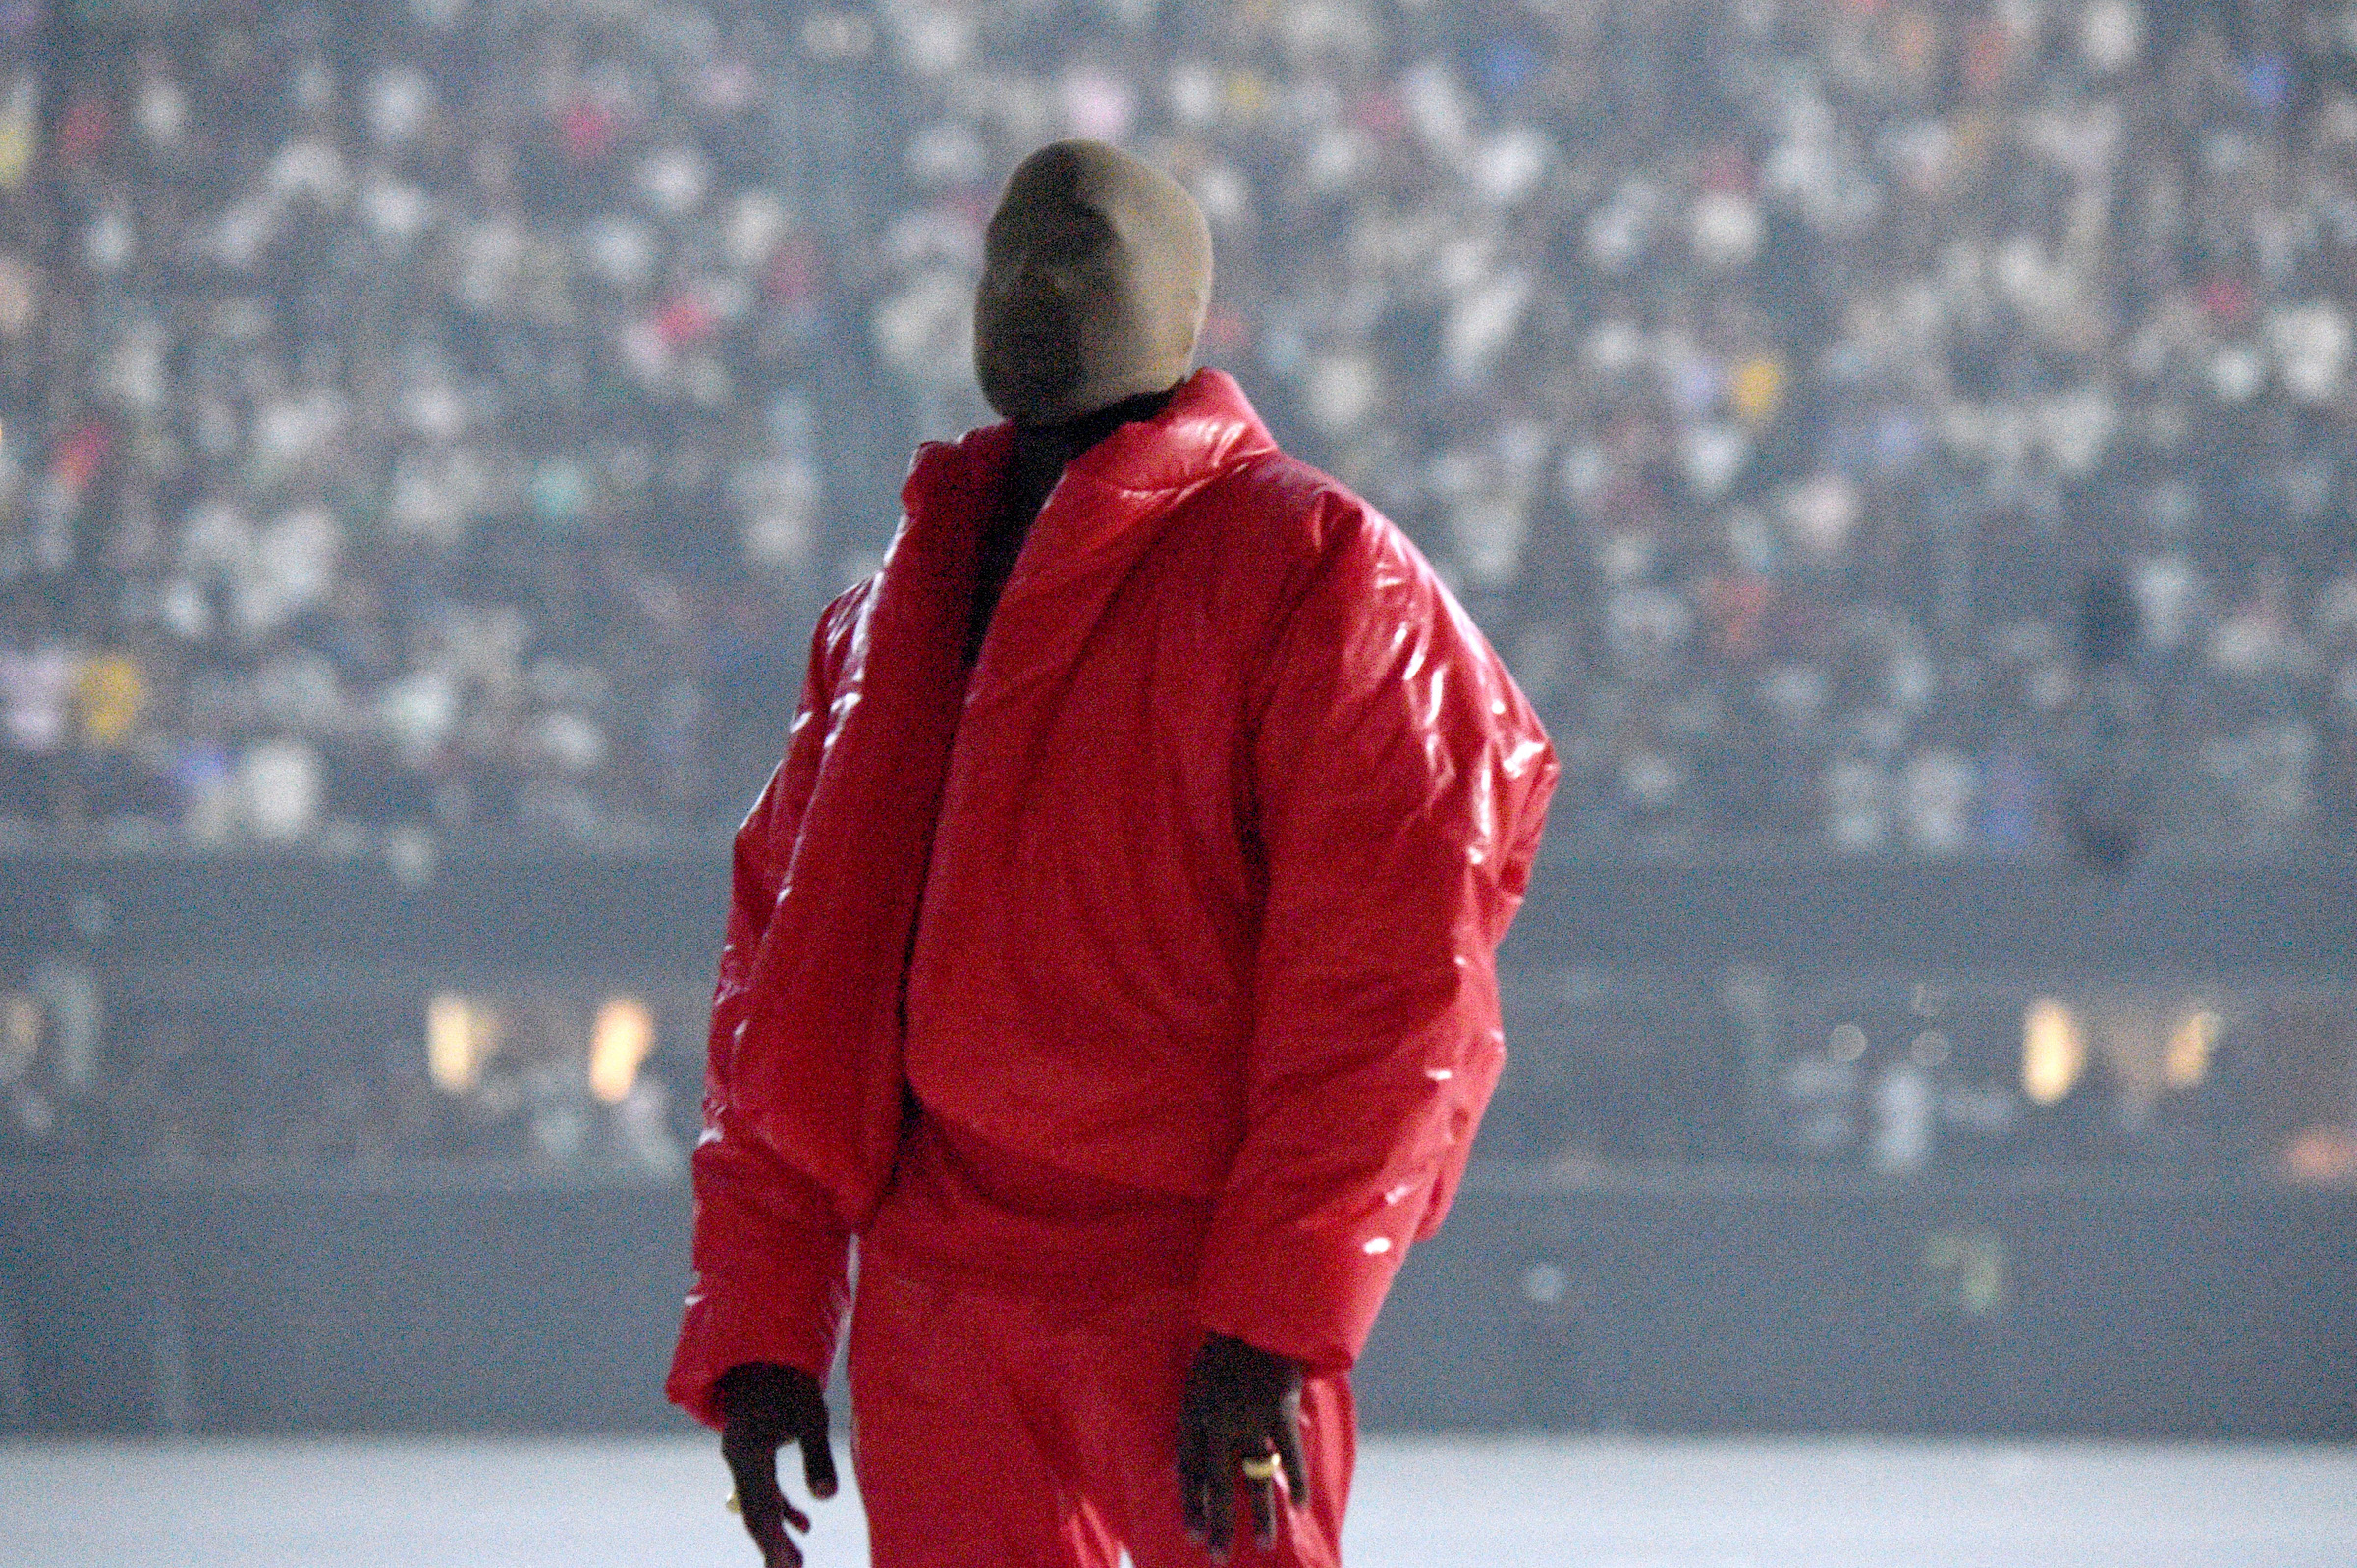 Kanye West wearing red and a face mask